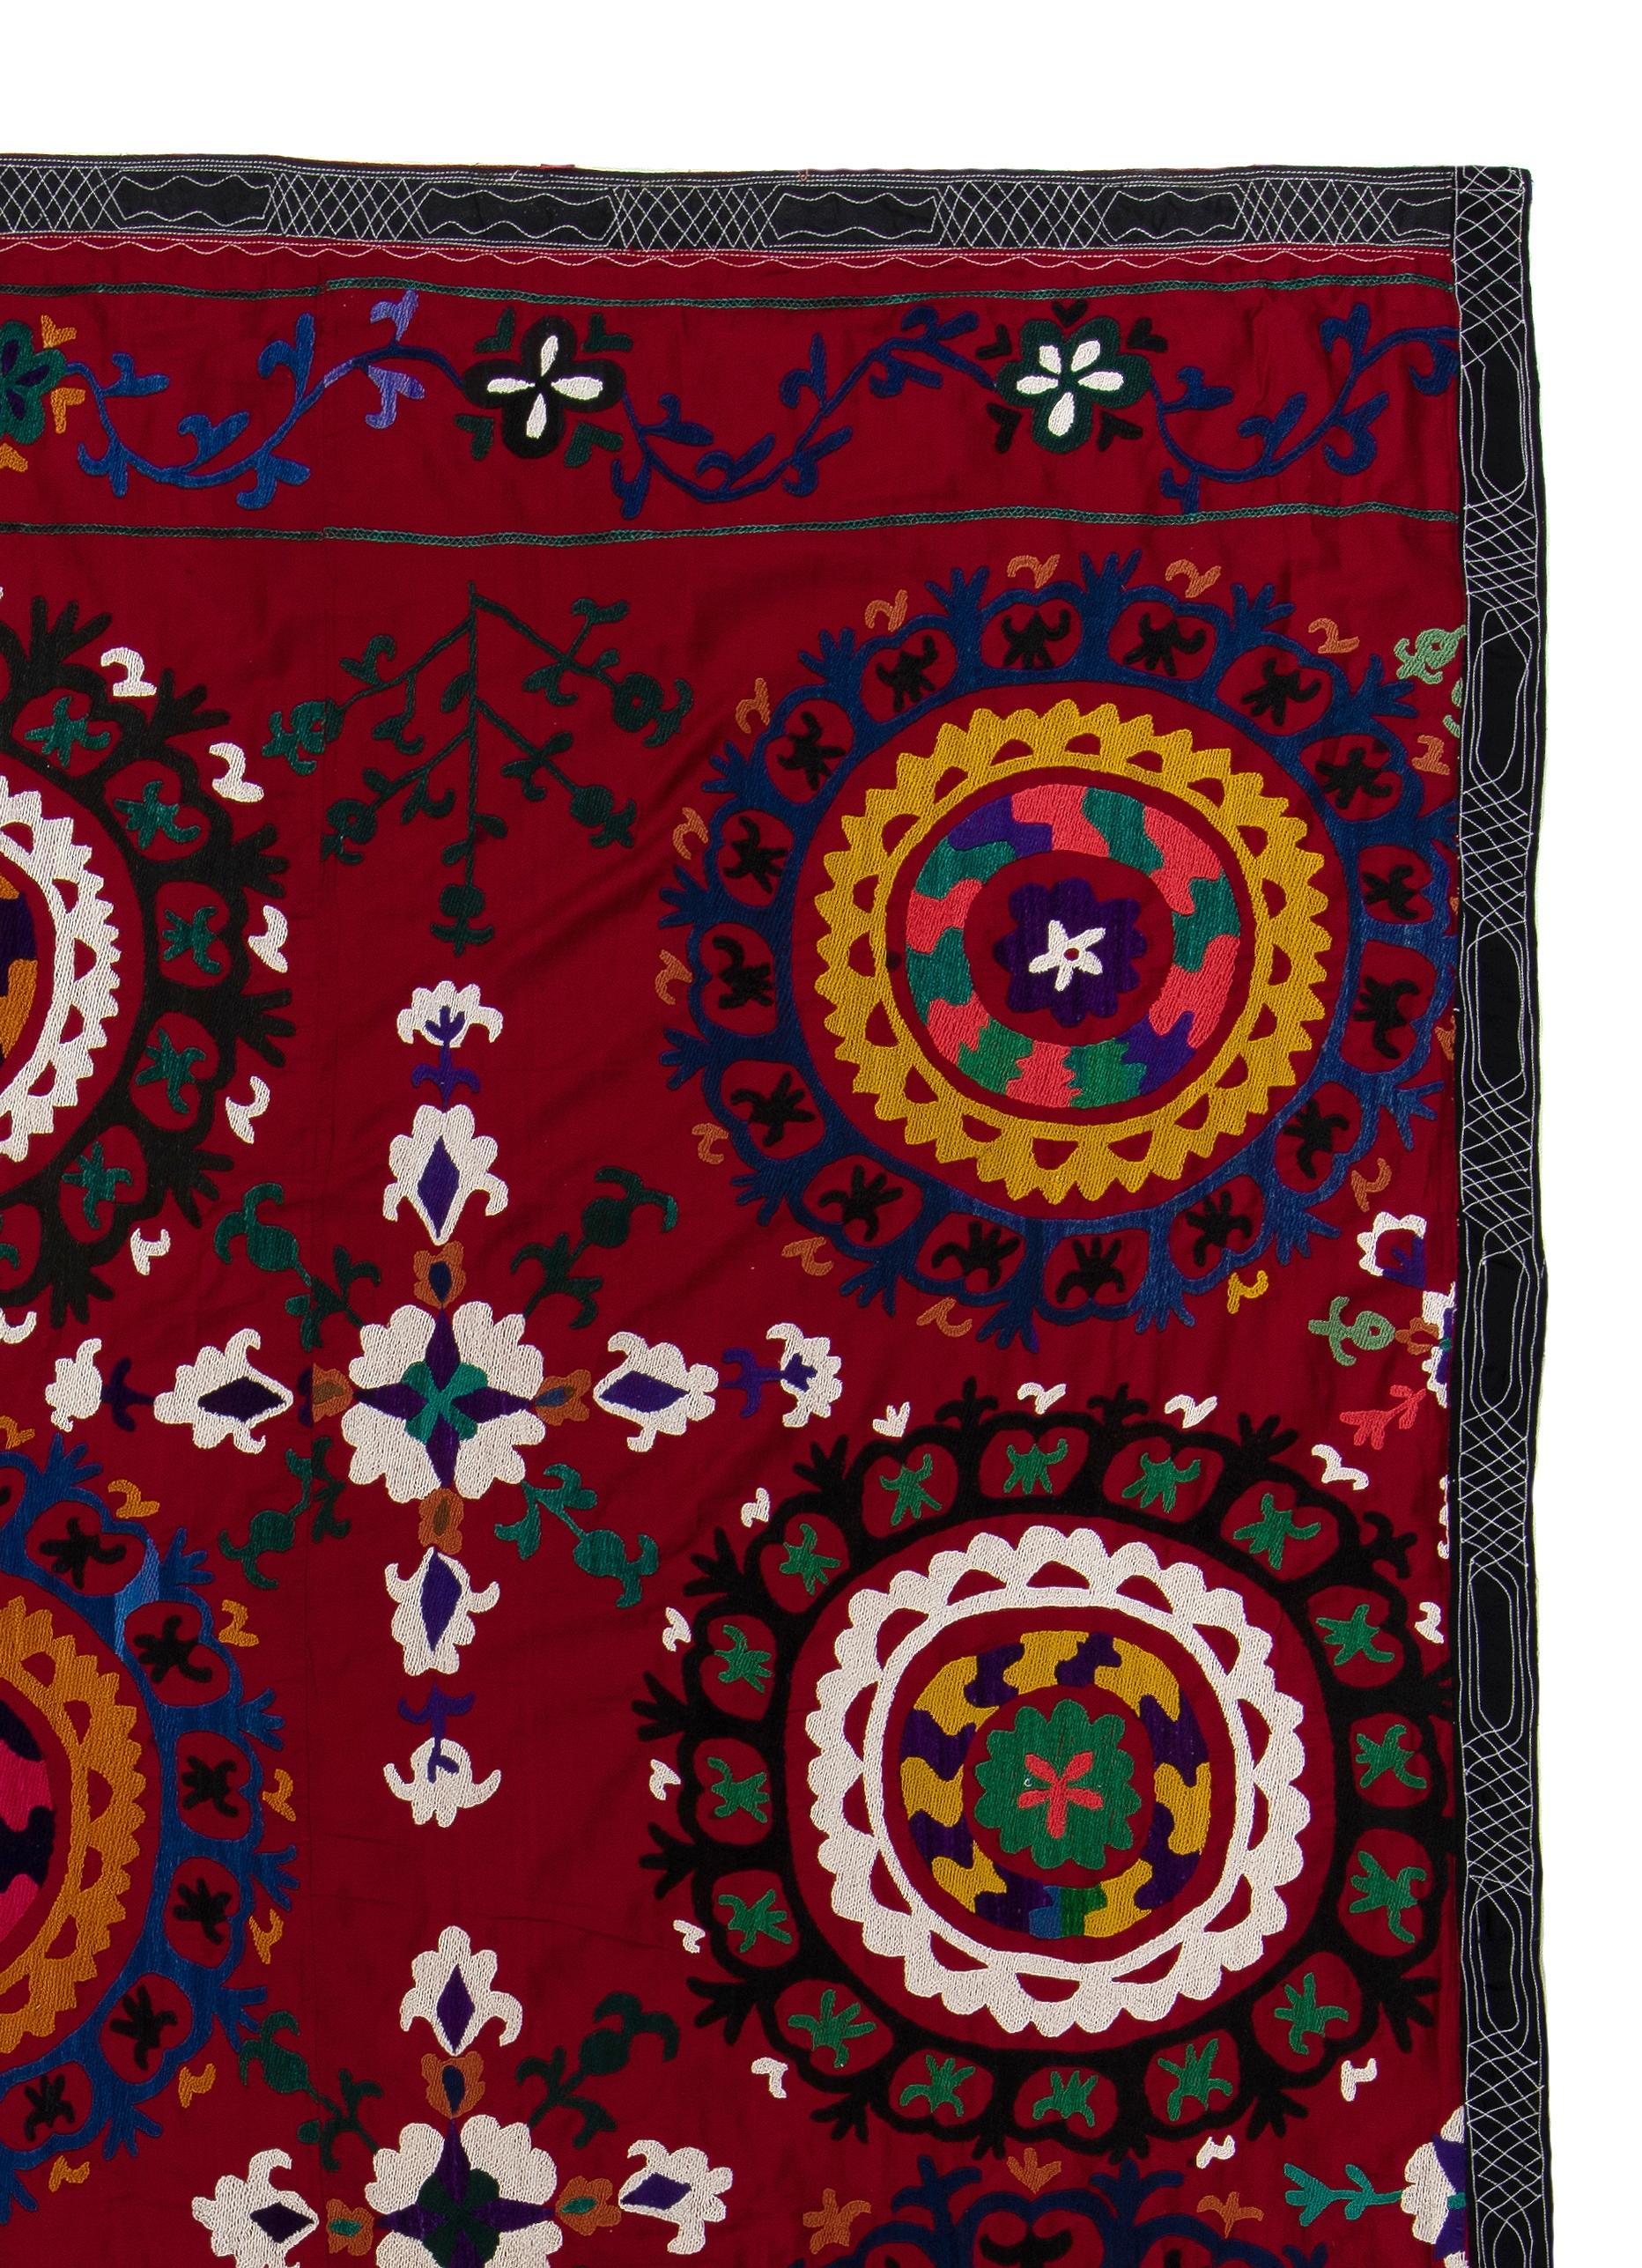 Uzbek 6.4x8.4 Ft Central Asian Suzani Textile, Embroidered Cotton & Silk Wall Hanging For Sale